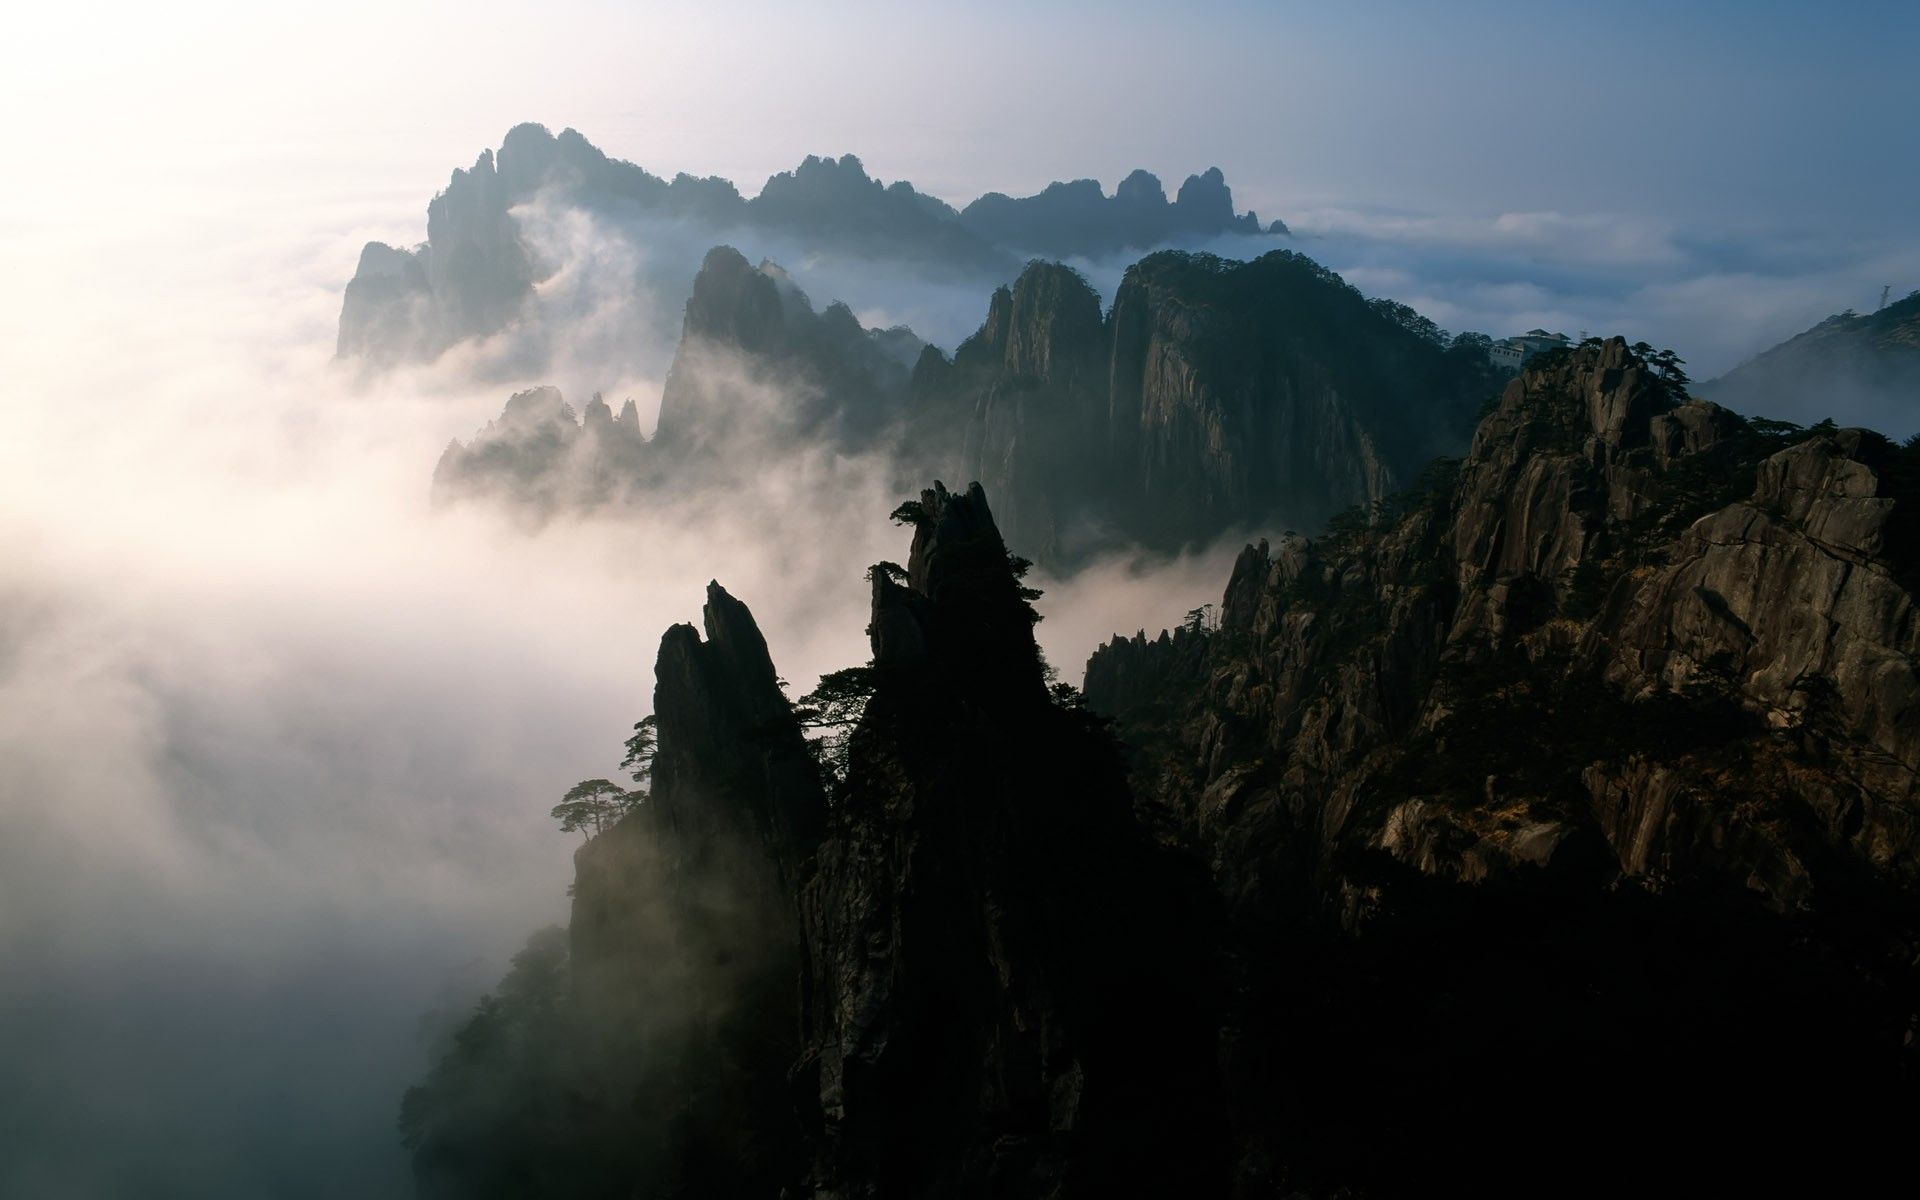 Exquisite Chinese landscape wallpaper Wallpaper Download Chinese landscape wallpaper Wallpaper Wallpaper Site